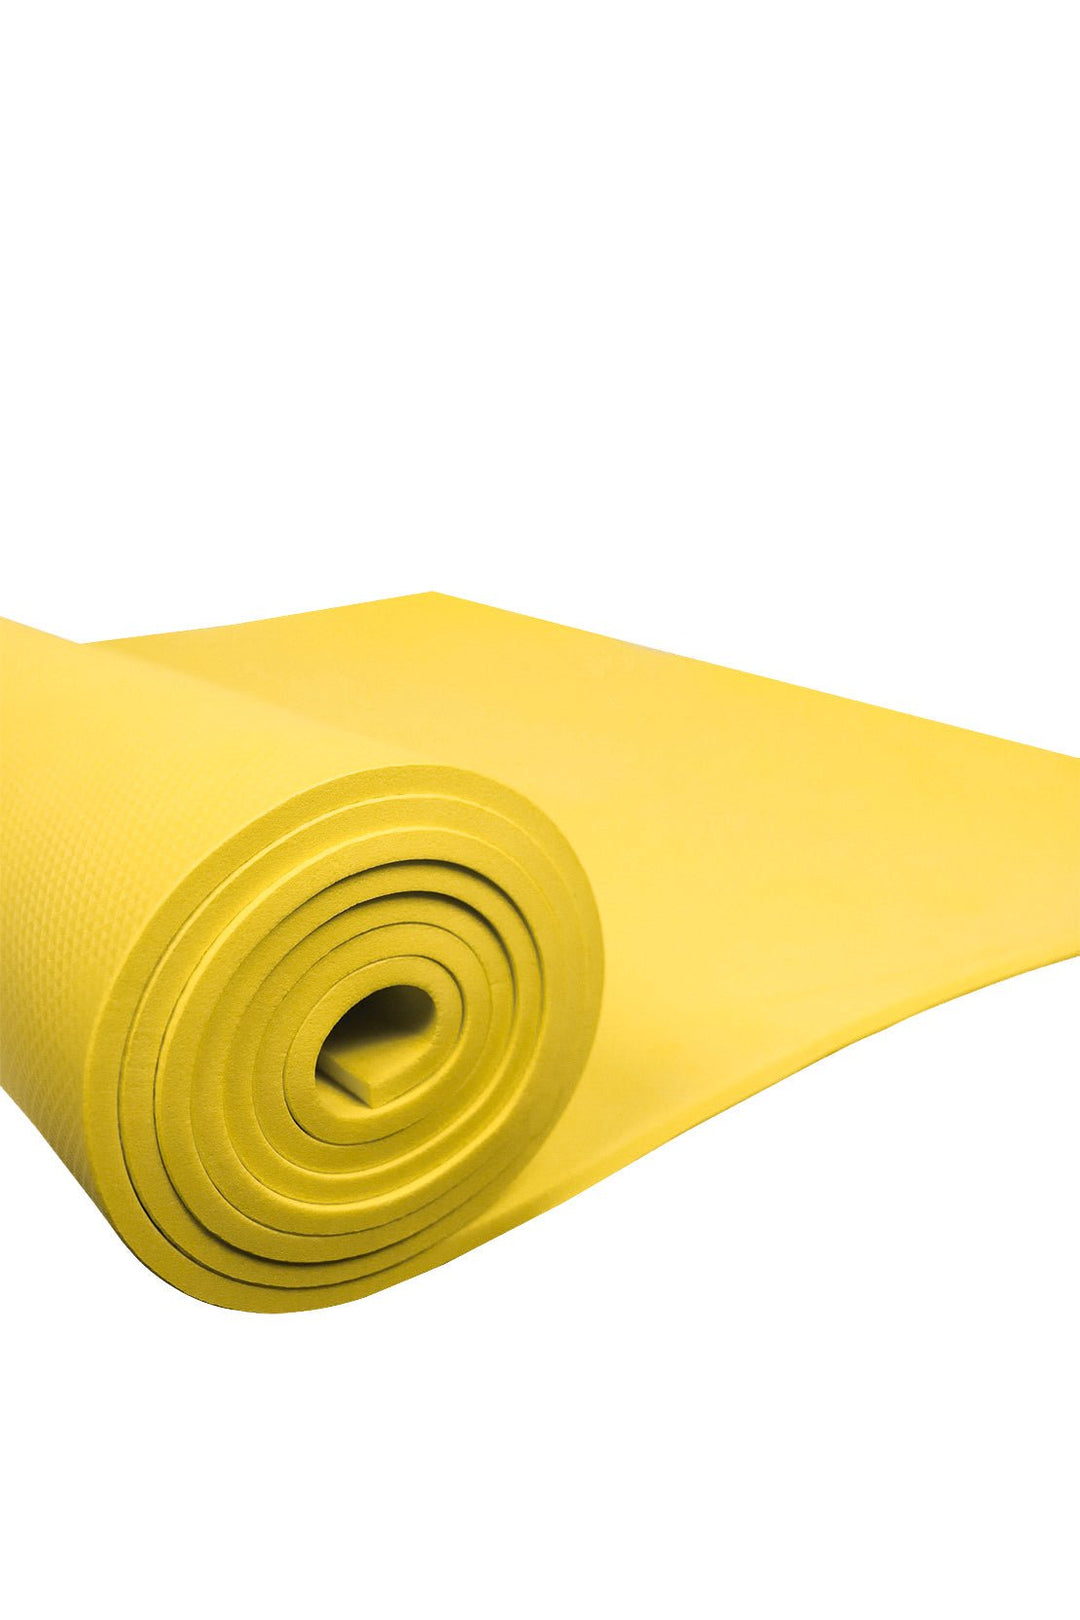 6 mm Thick Yoga Mat for Indoor and Outdoor Use, Yellow - V Surfaces